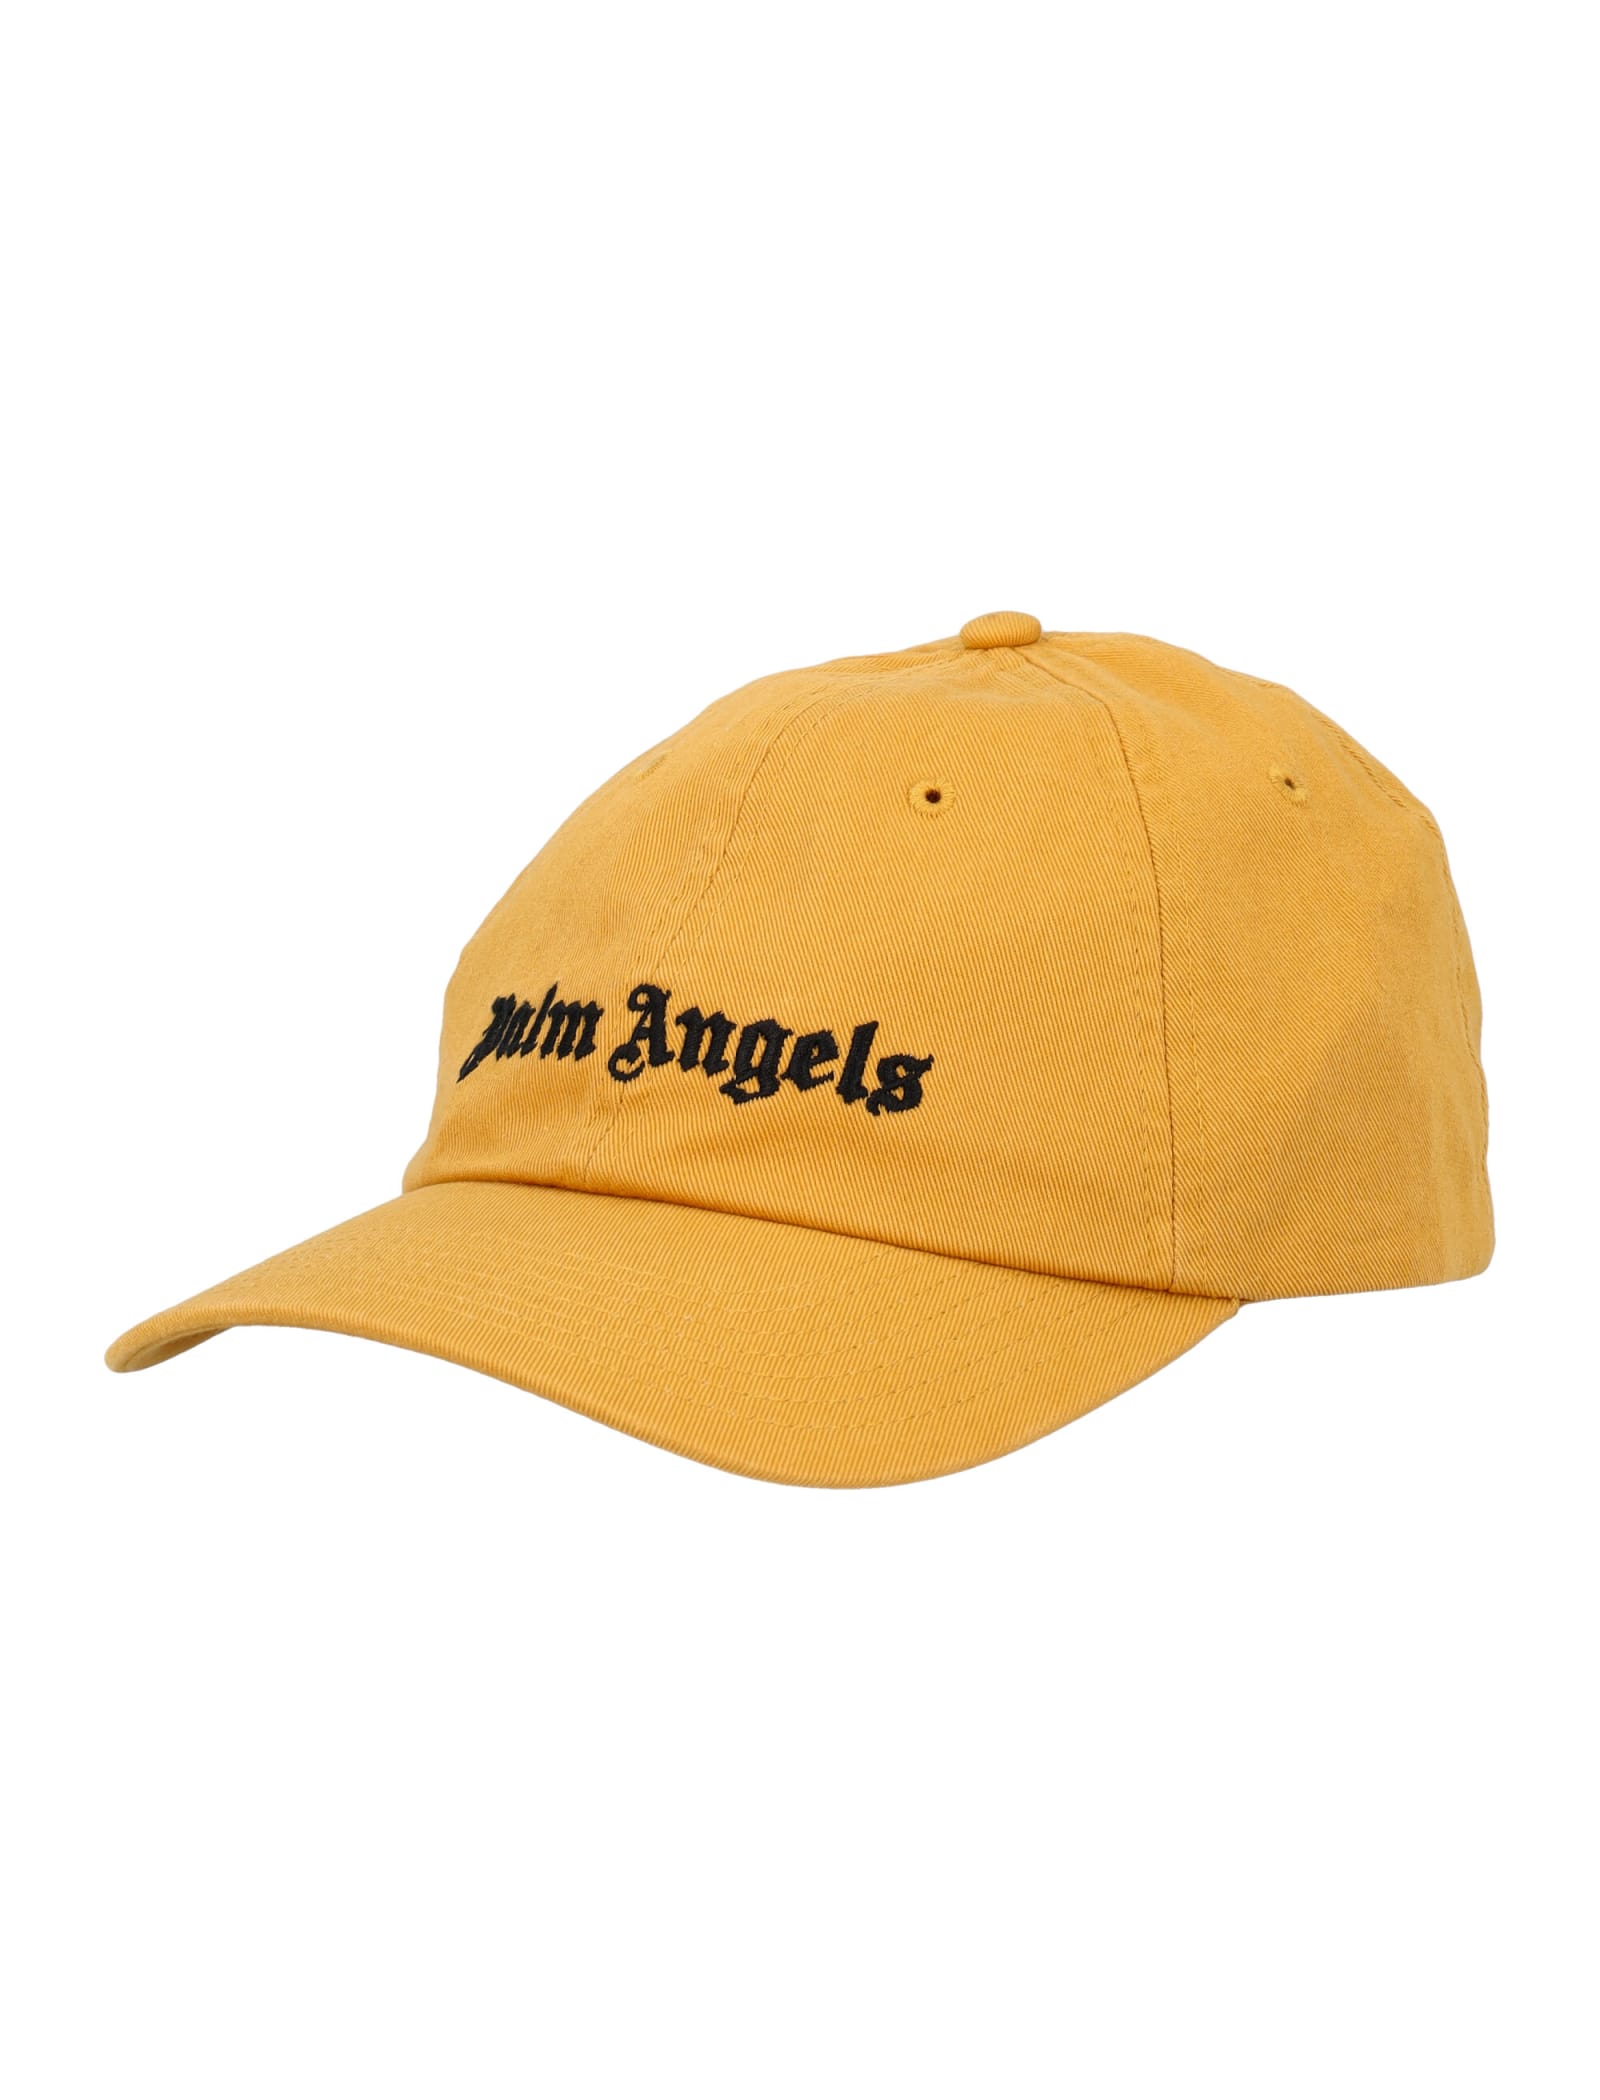 Palm Angels Embroidered Logo Cap In 2010